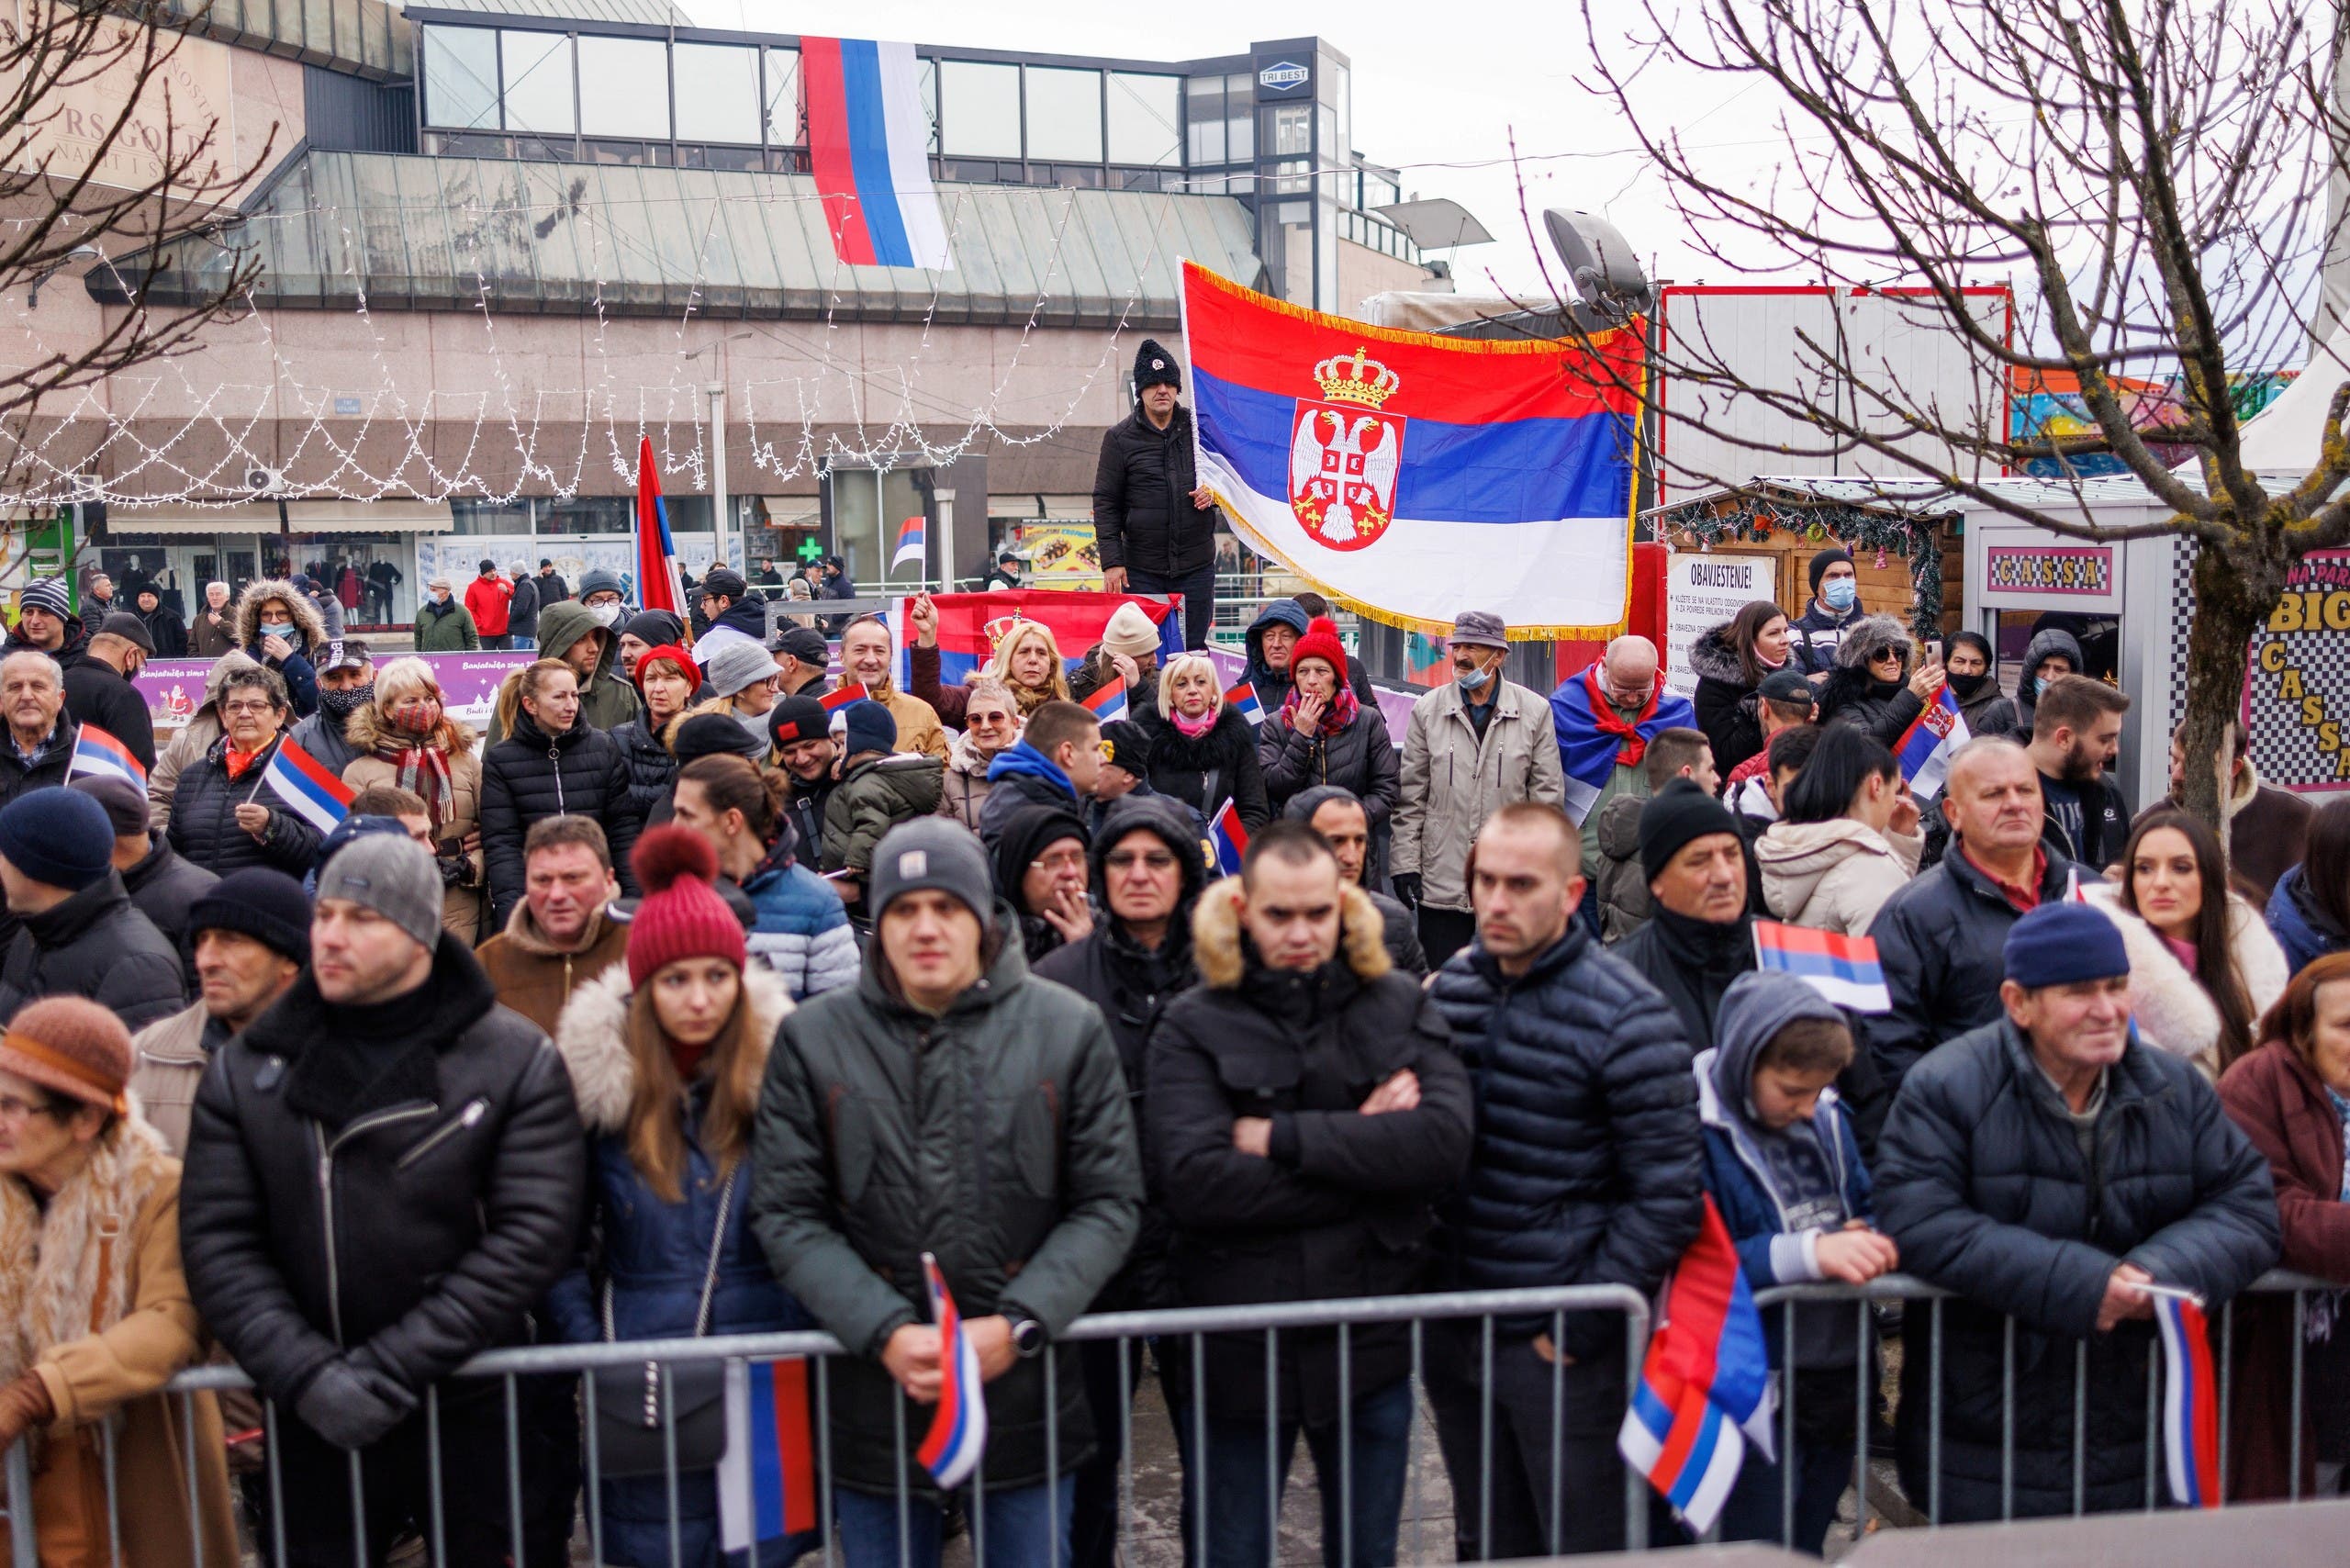 The flag of Serbia was raised during the parade